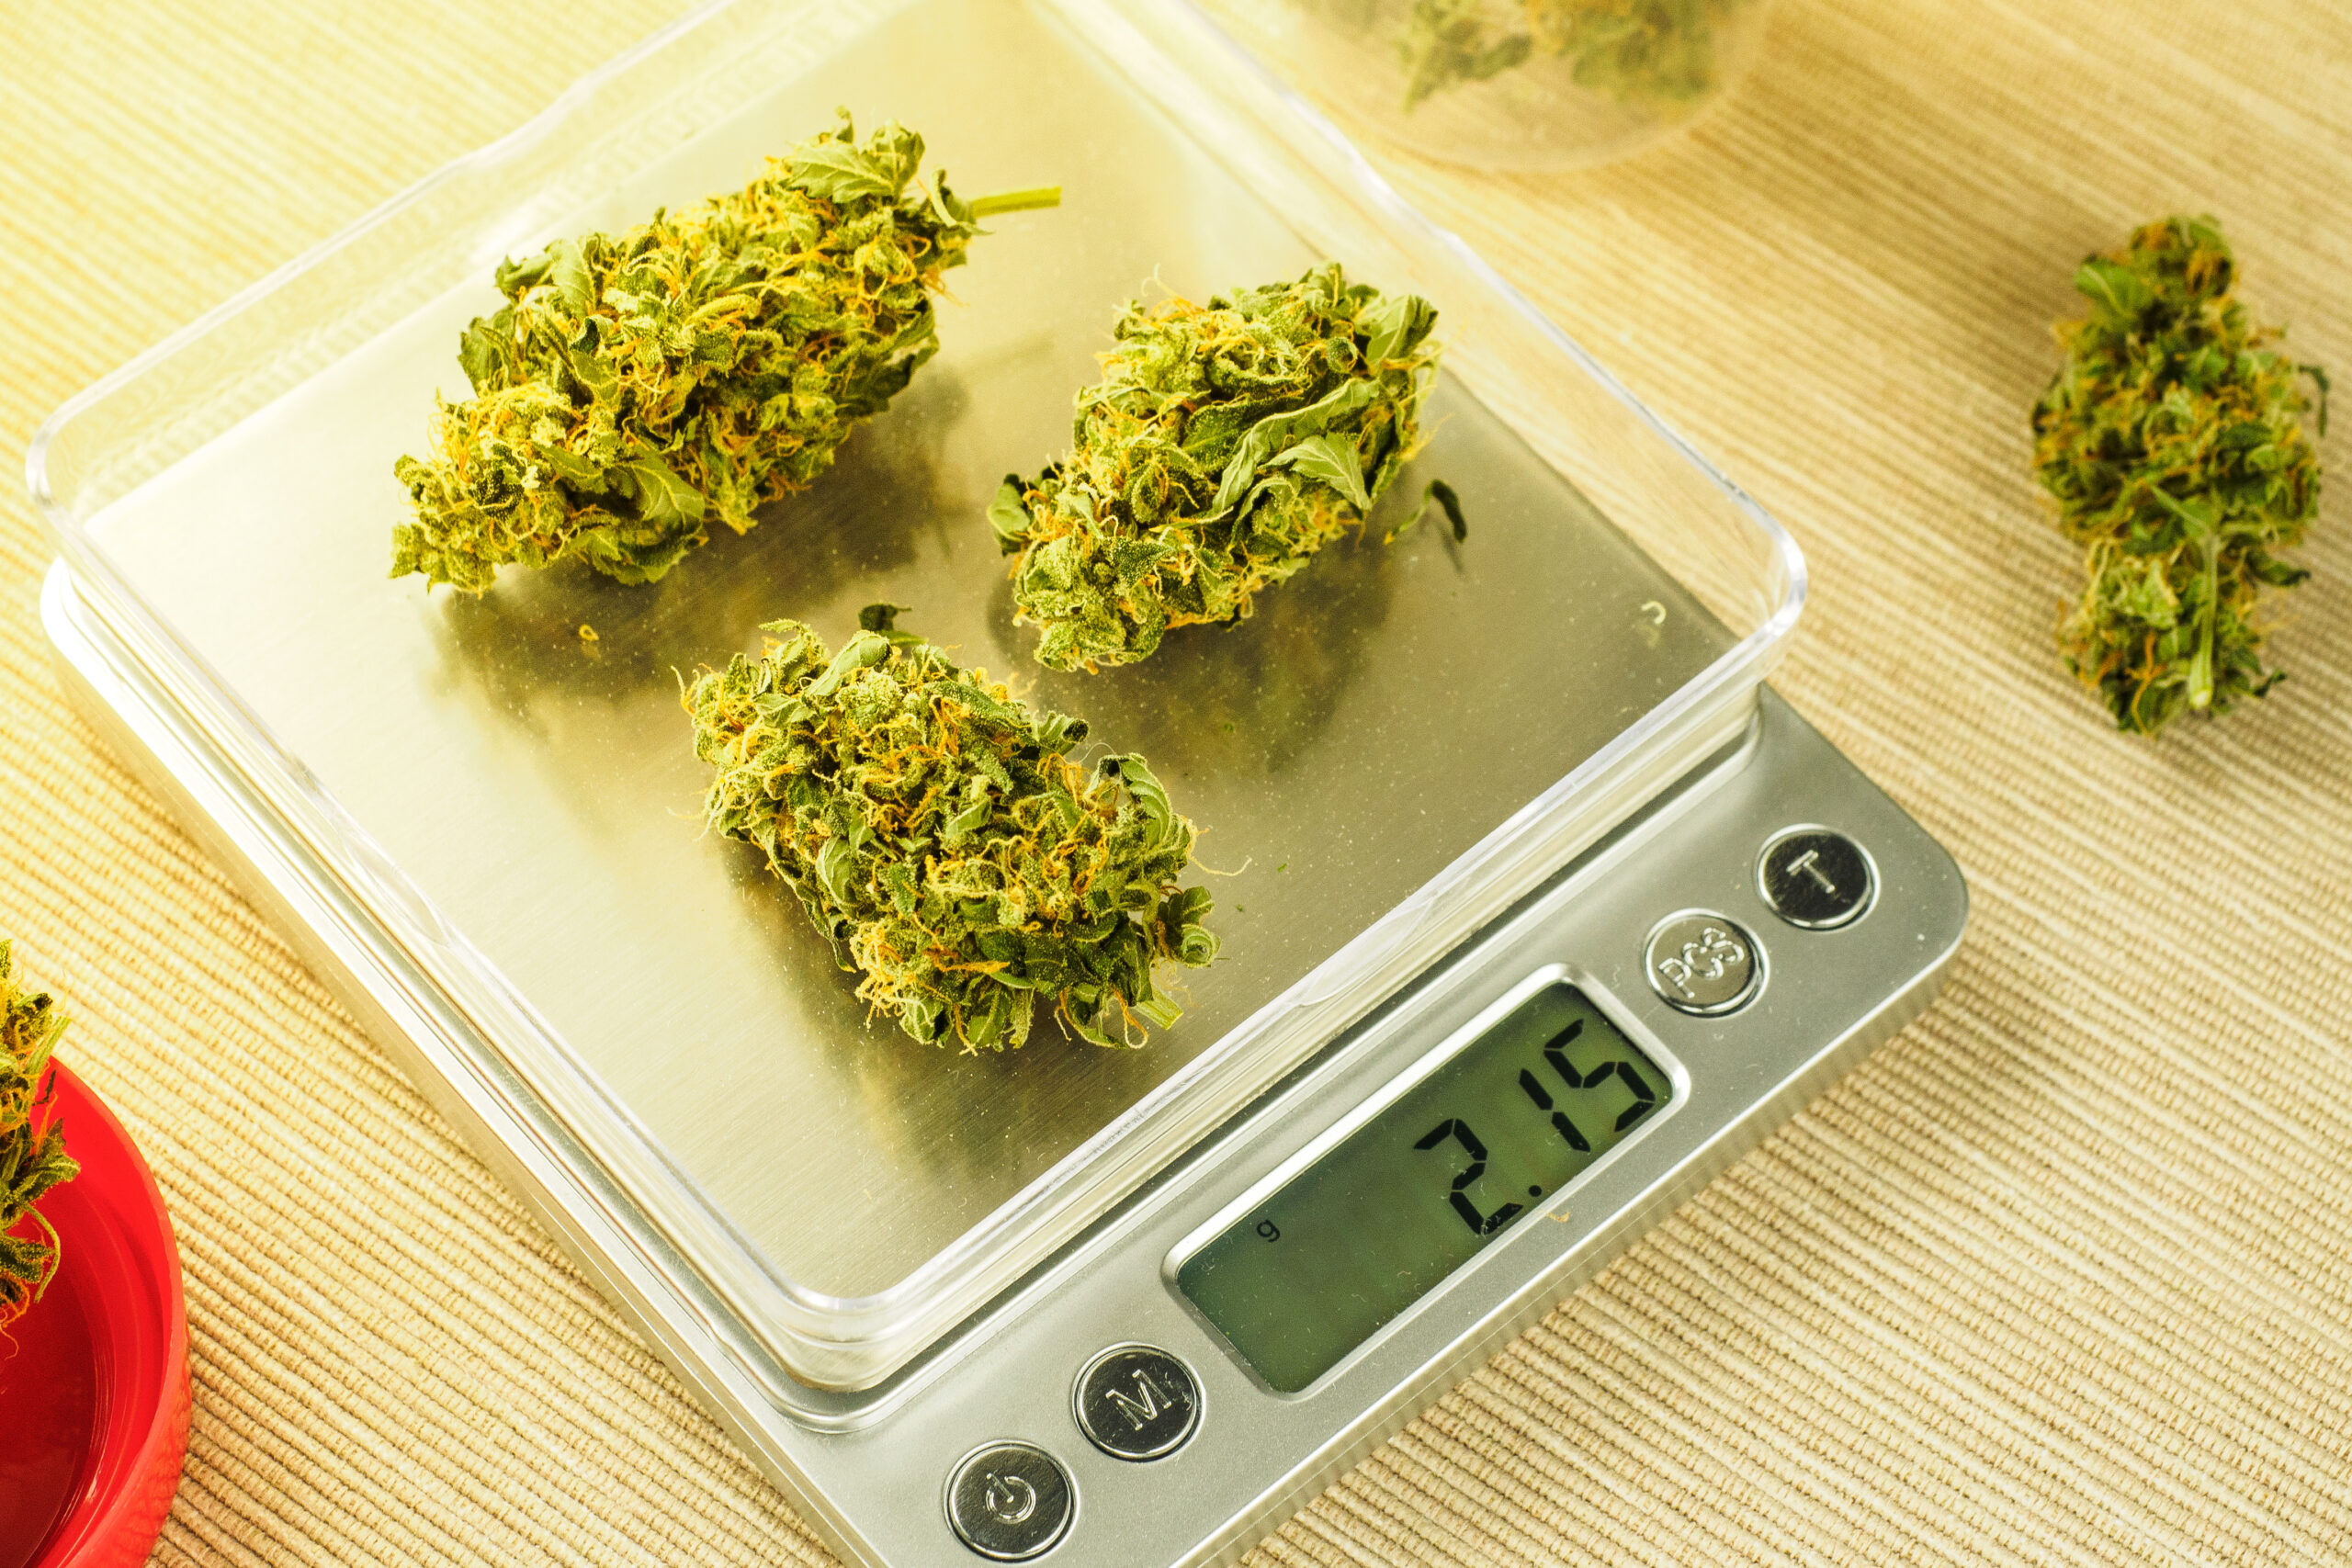 Guide to Cannabis Quantities and Measurements